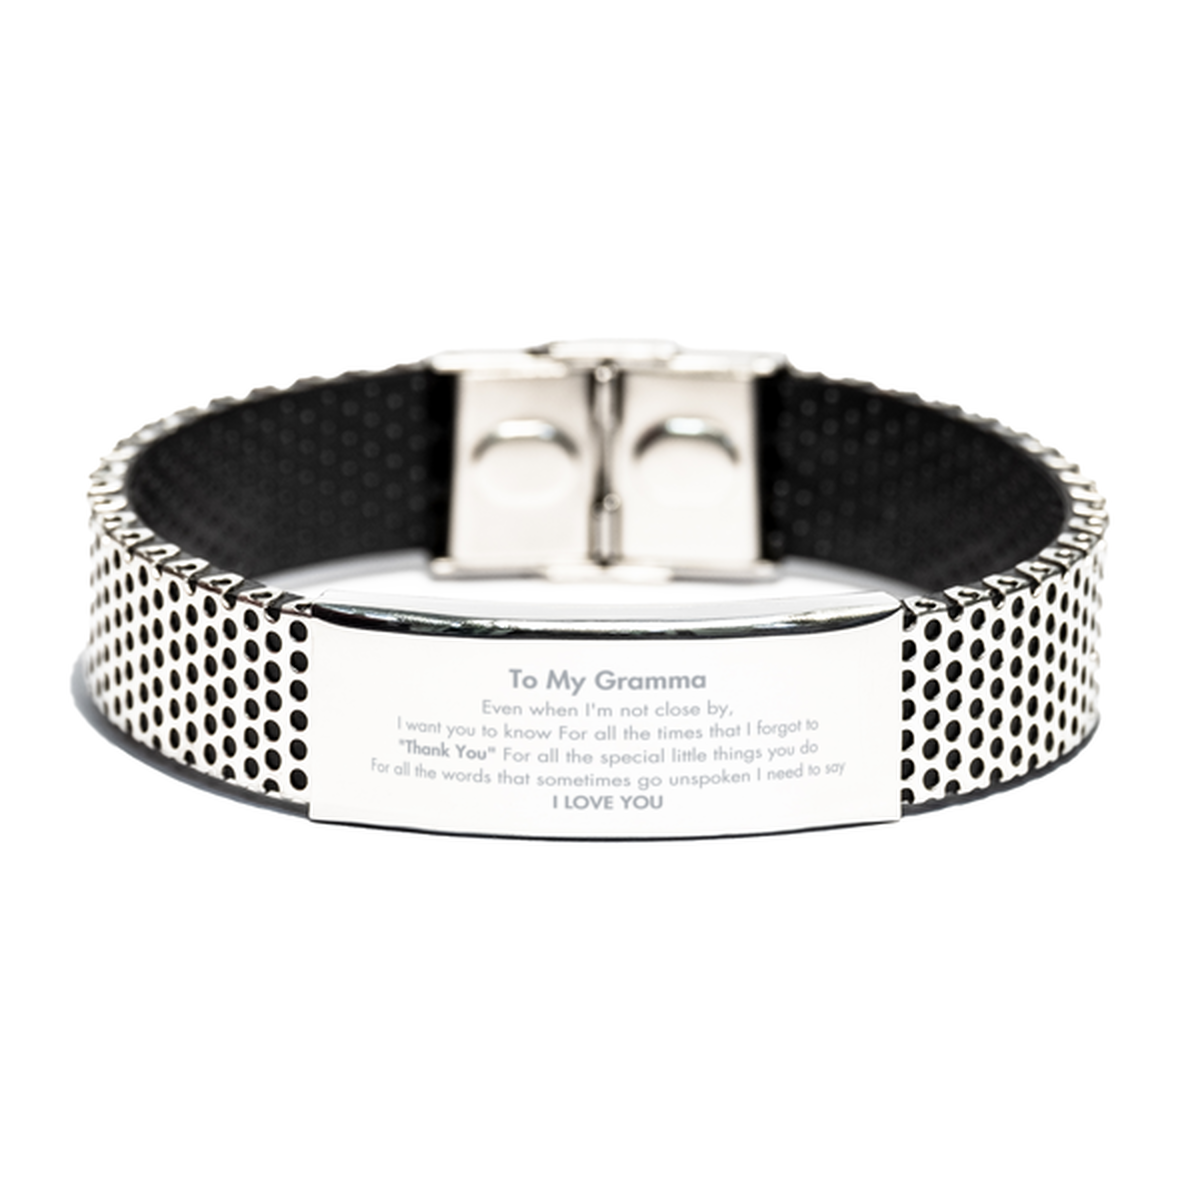 Thank You Gifts for Gramma, Keepsake Stainless Steel Bracelet Gifts for Gramma Birthday Mother's day Father's Day Gramma For all the words That sometimes go unspoken I need to say I LOVE YOU